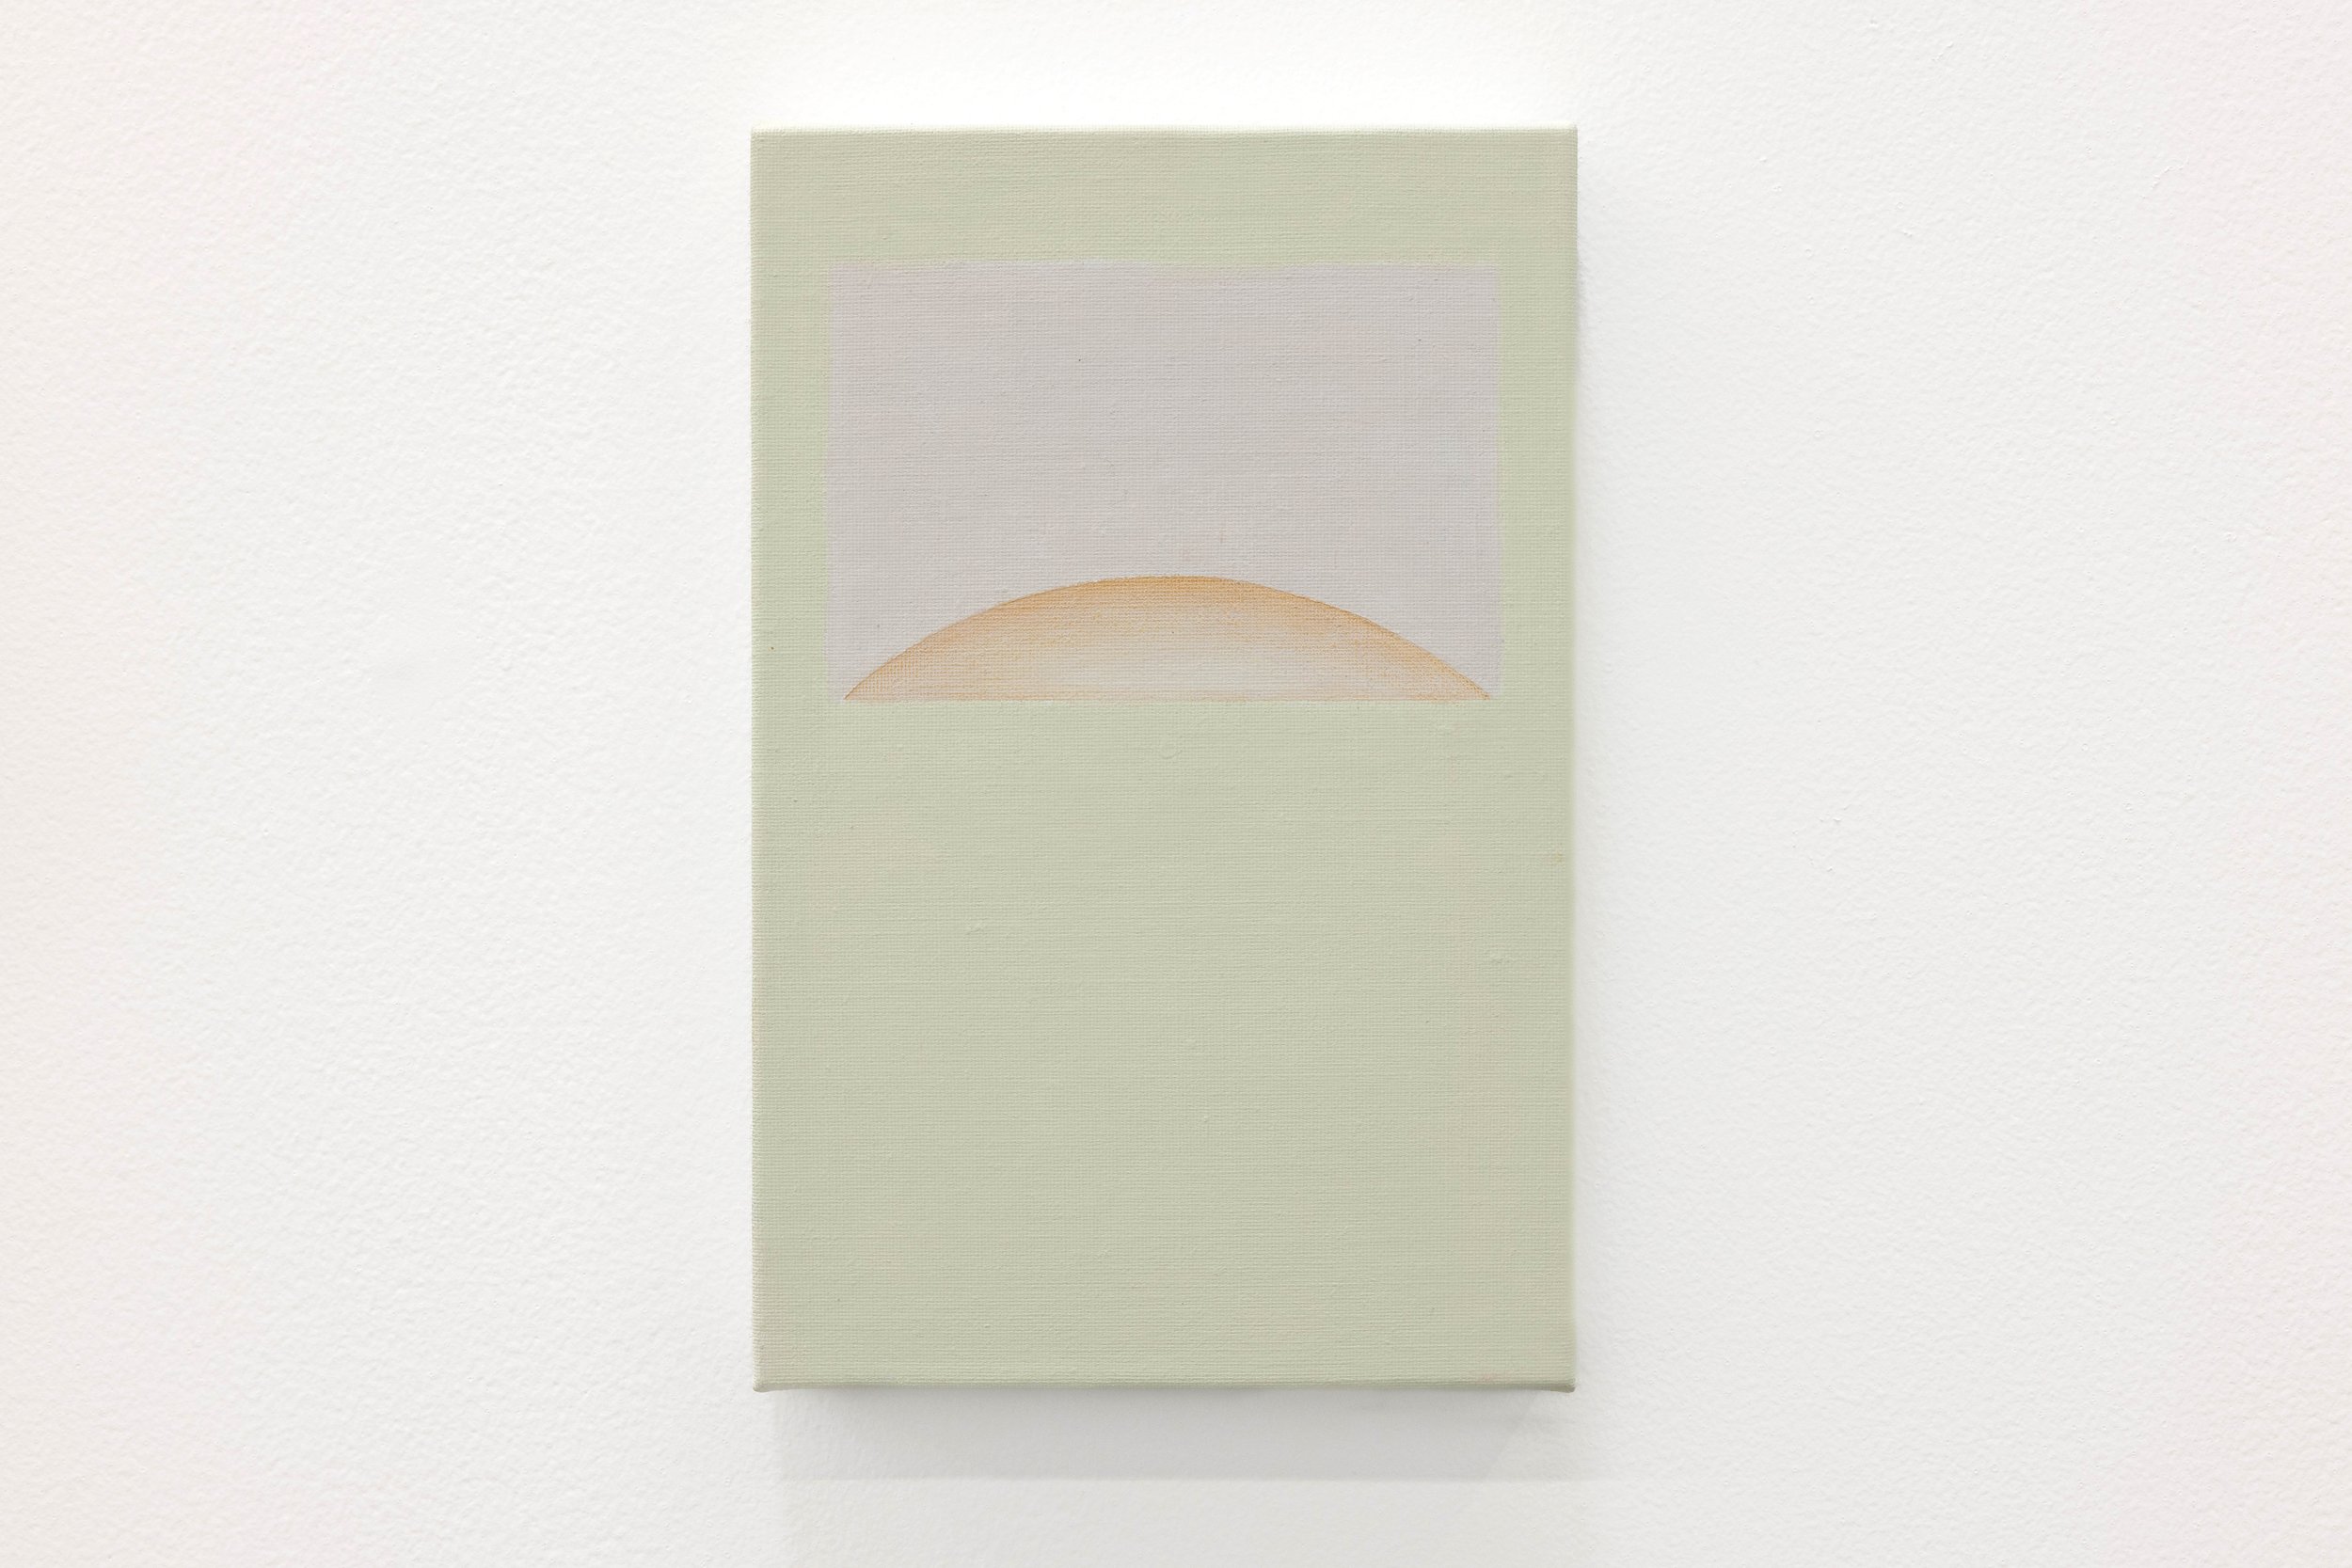  Brown moon, 2023, gesso, dust pigment and graphite on canvas, 31 x 20 cm 